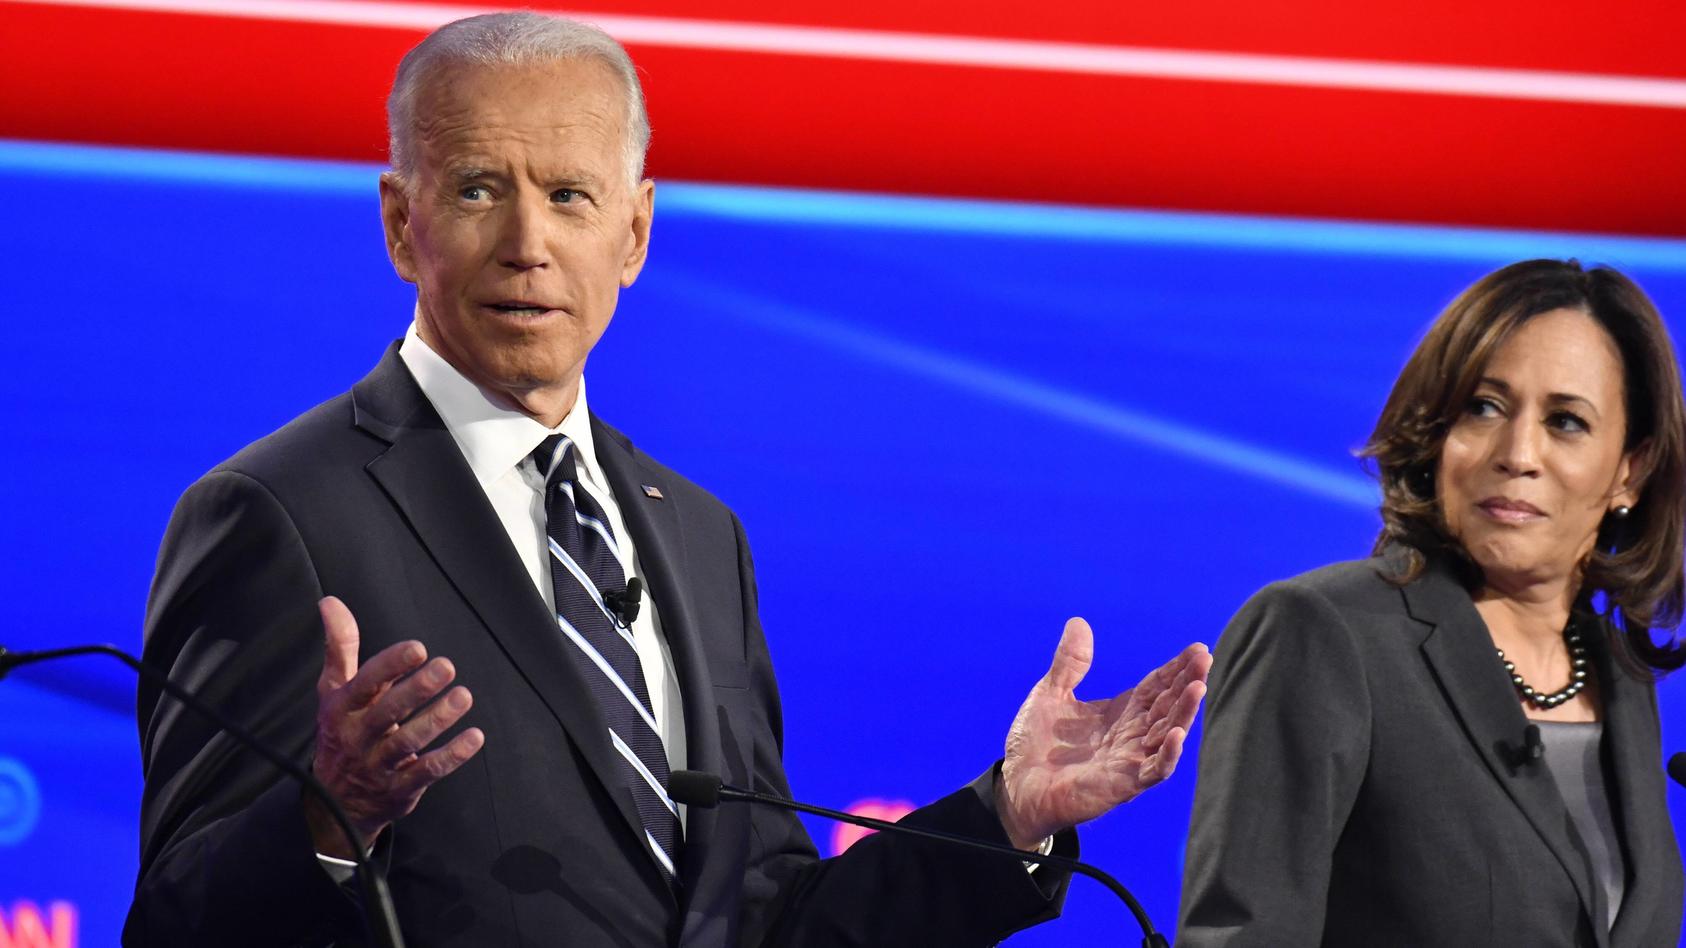  Democratic presidential candidates Former Vice President Joe Biden and California Sen. Kamala Harris participate on the second night of the CNN Democratic Presidential Debate at the Fox Theater in Detroit on Wednesday, July 31, 2019. PUBLICATIONxINx